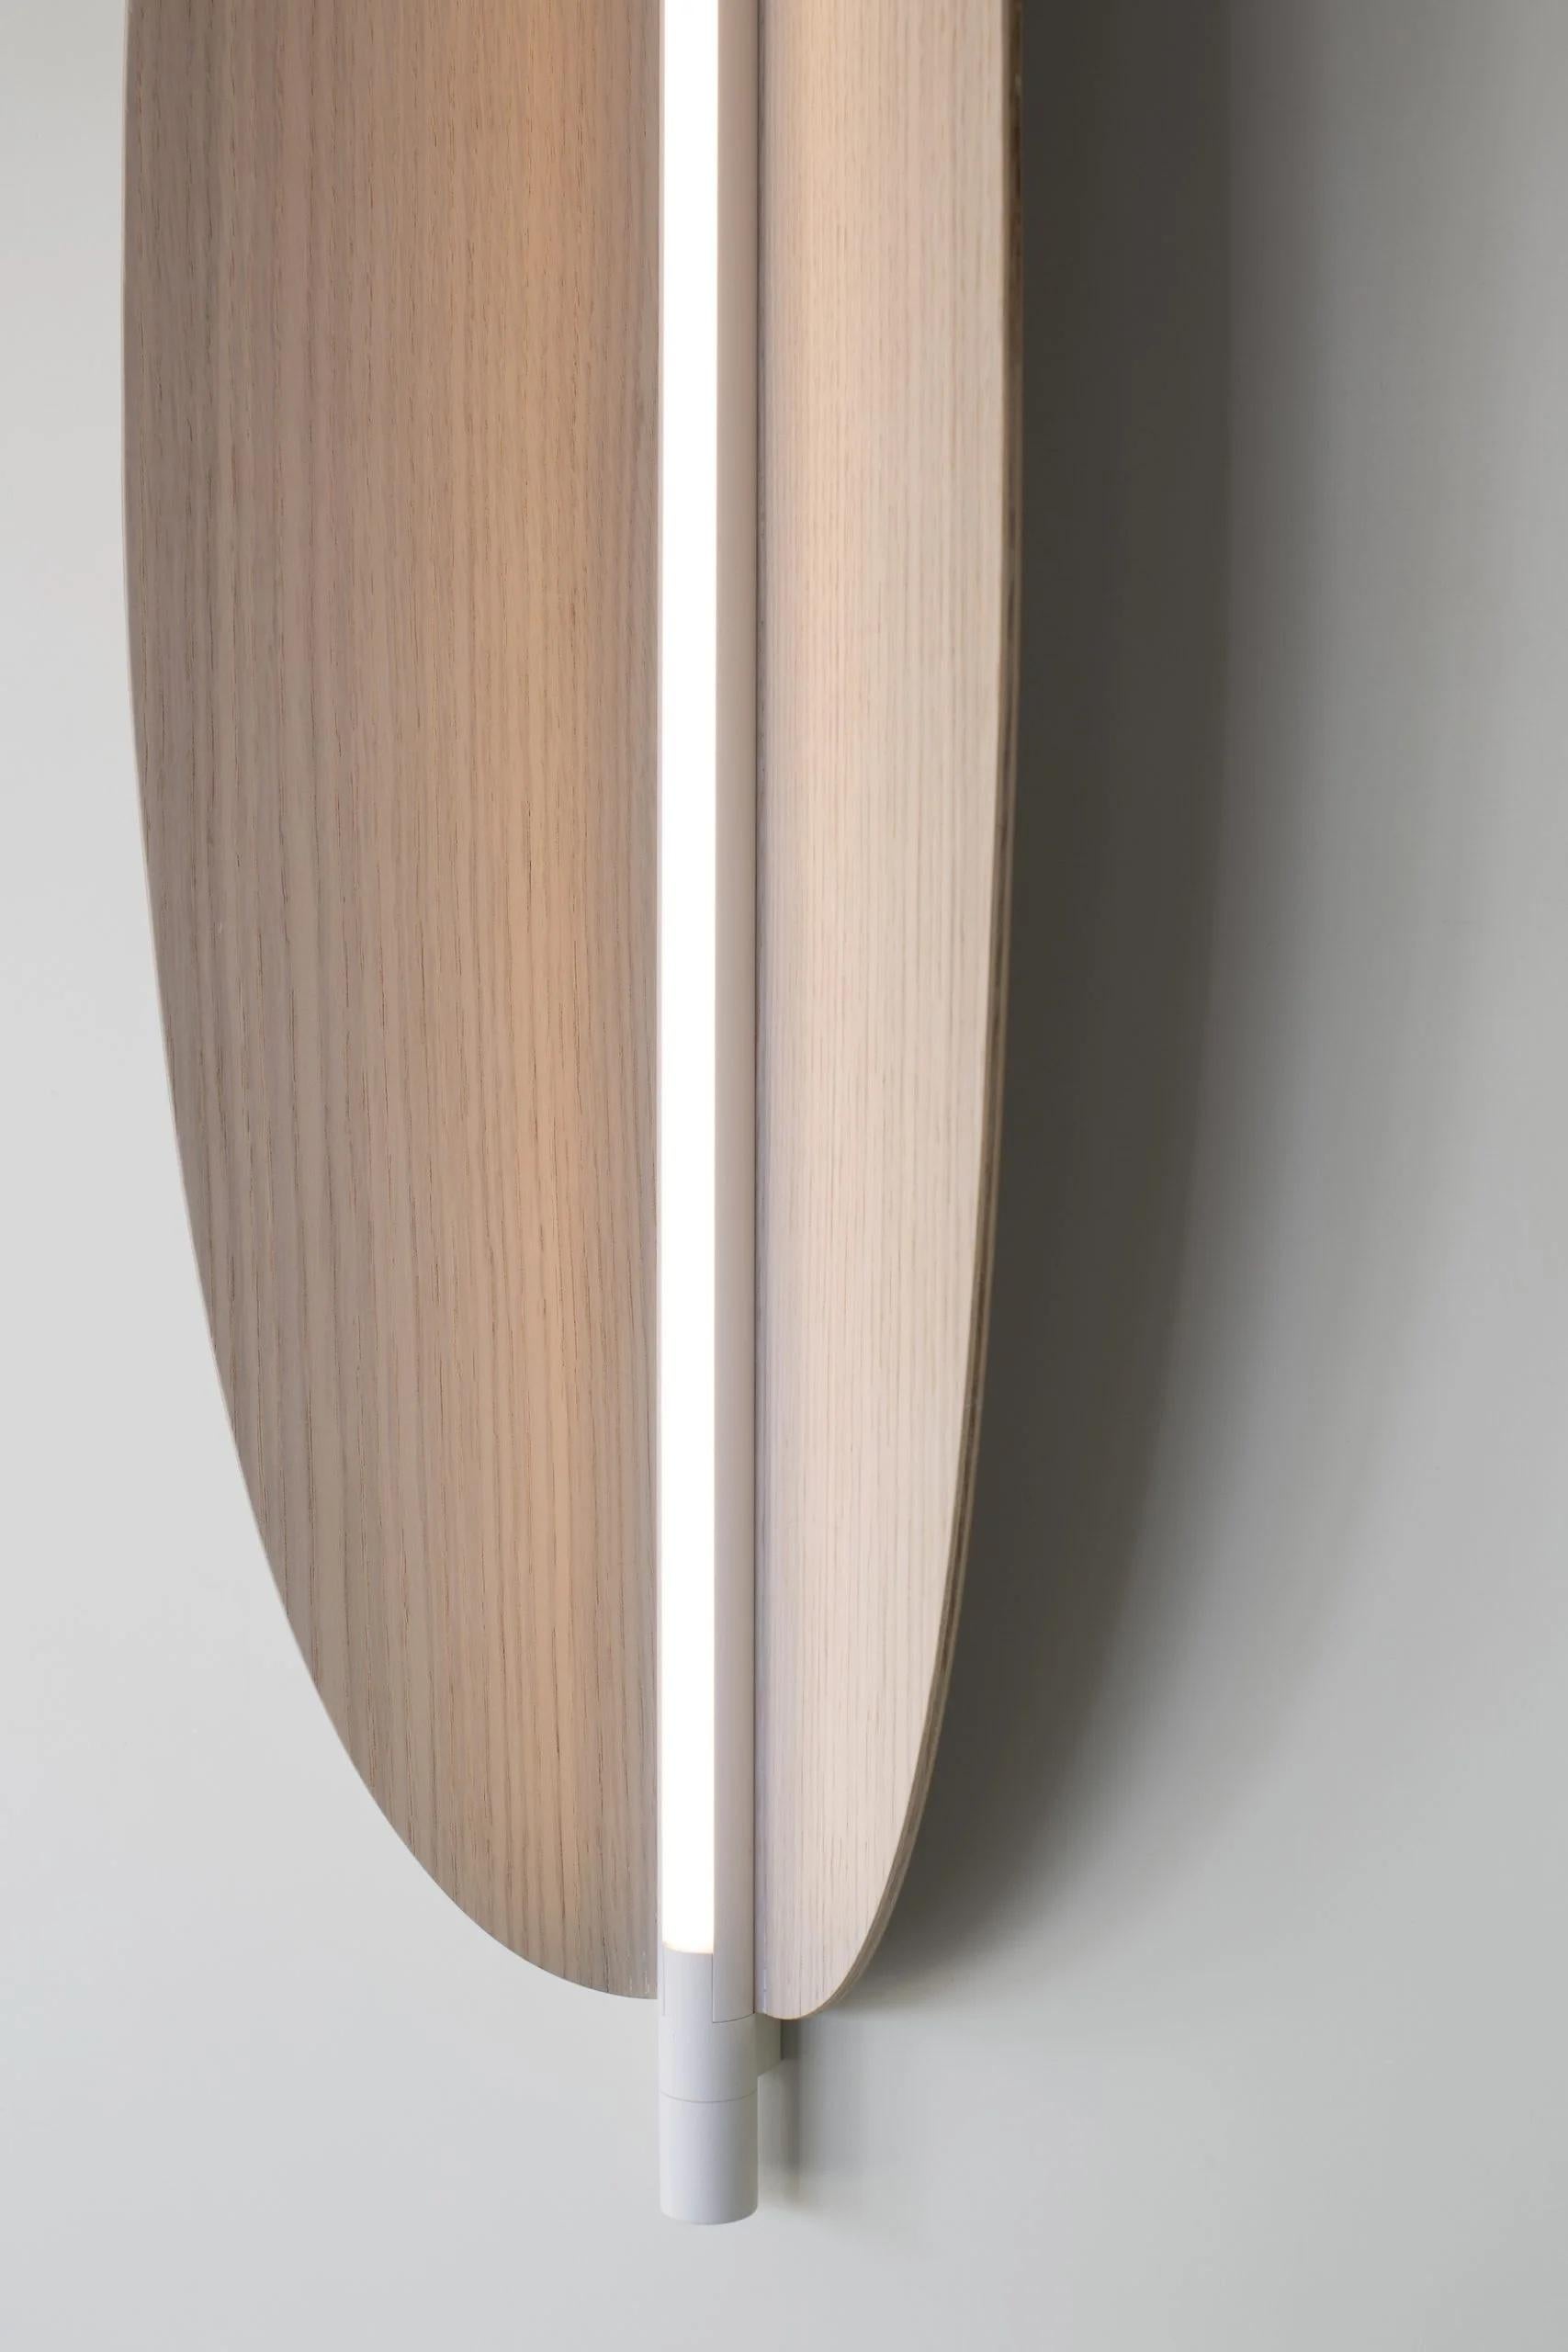 Italian Contemporary Wall Lamp 'Thula 562.43' by Federica Biasi x Tooy, Black + Walnut For Sale